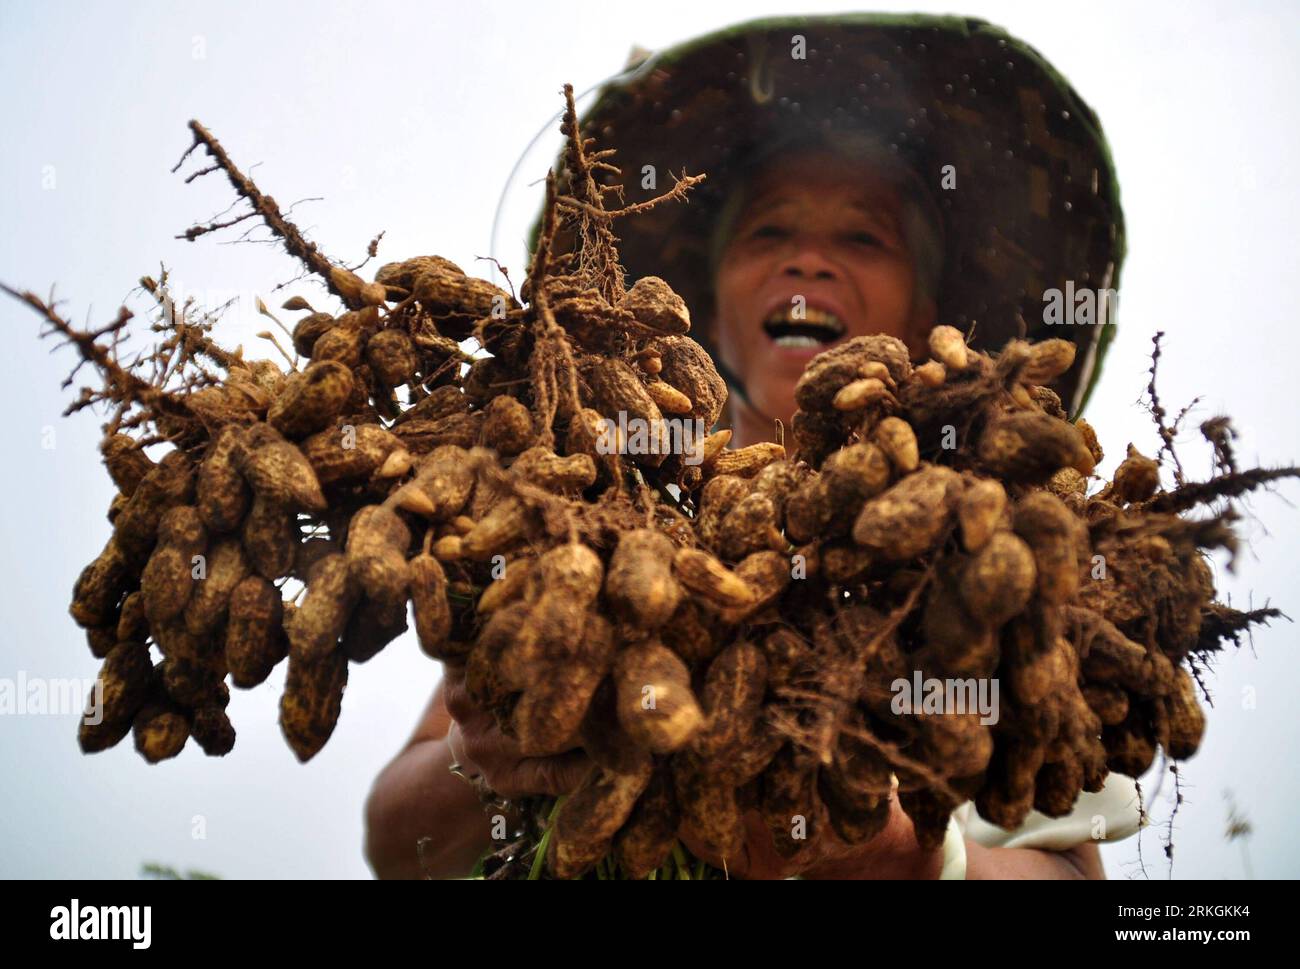 Bildnummer: 55604693  Datum: 18.07.2011  Copyright: imago/Xinhua (110720) -- NANNING, July 20, 2011 (Xinhua) -- A farmer shows ripe peanuts in Nanning City, south China s Guangxi Zhuang Autonomous Region, July 18, 2011. Recently, crops such as early season rice, corn, peanuts come into the harvest season in some parts of China. (Xinhua/Lu Bo an) (zl) CHINA-AGRICULTURE-HARVEST(CN) PUBLICATIONxNOTxINxCHN Wirtschaft Gesellschaft Bauern Ernte xsk 2011 quer  o0 Erdnüsse Arbeitswelten Feld Landwirtschaft    Bildnummer 55604693 Date 18 07 2011 Copyright Imago XINHUA  Nanning July 20 2011 XINHUA a Far Stock Photo